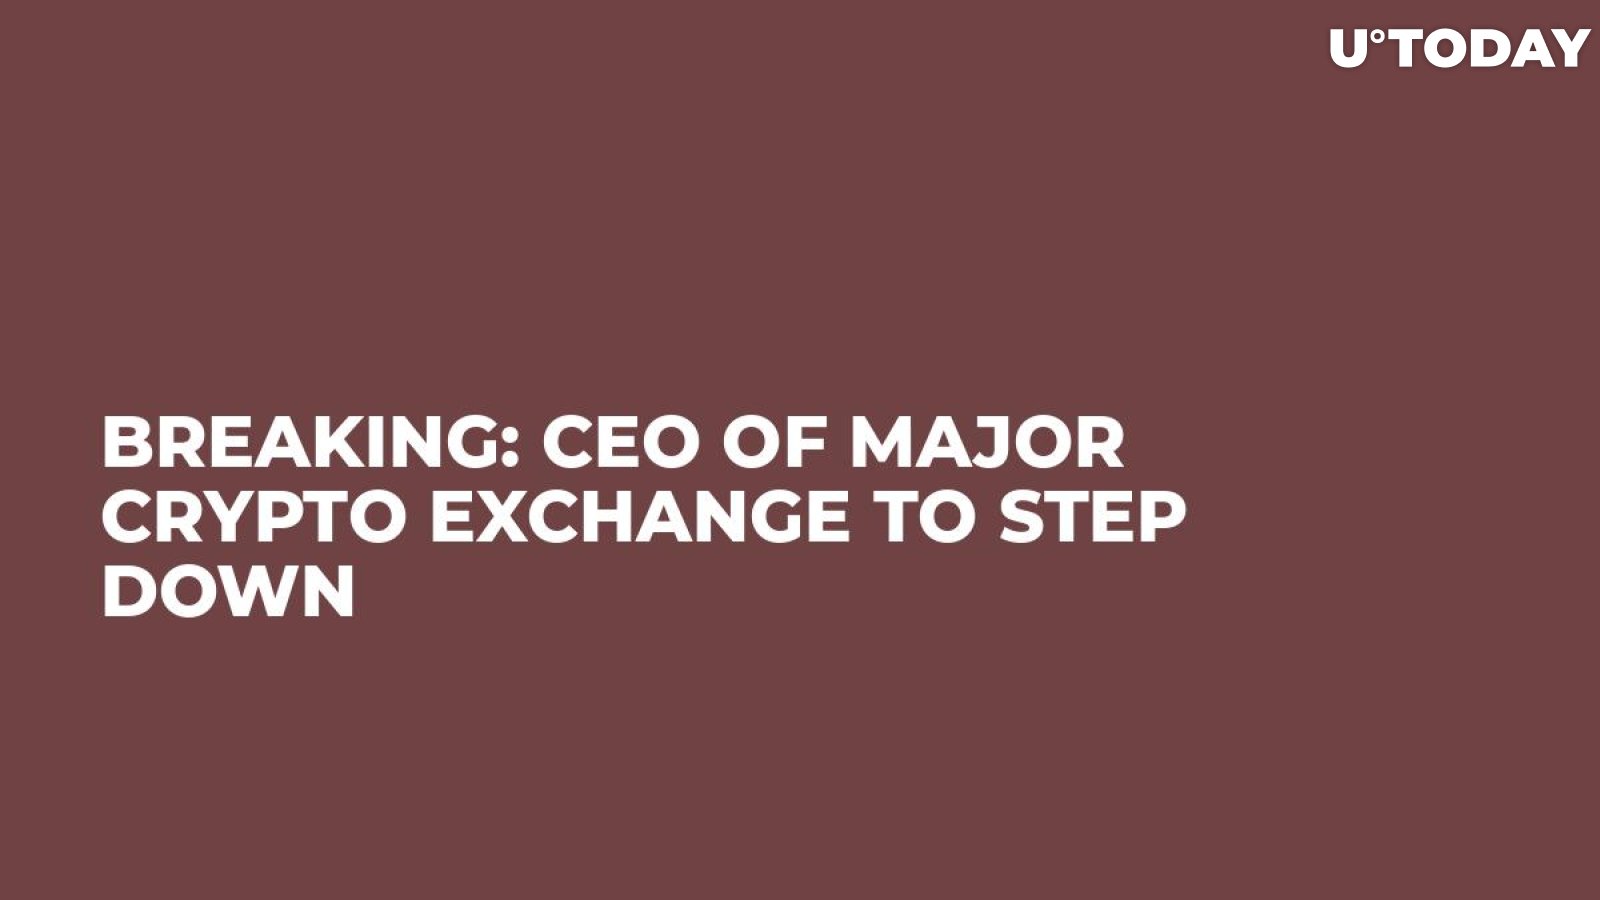 Breaking: CEO of Major Crypto Exchange to Step Down